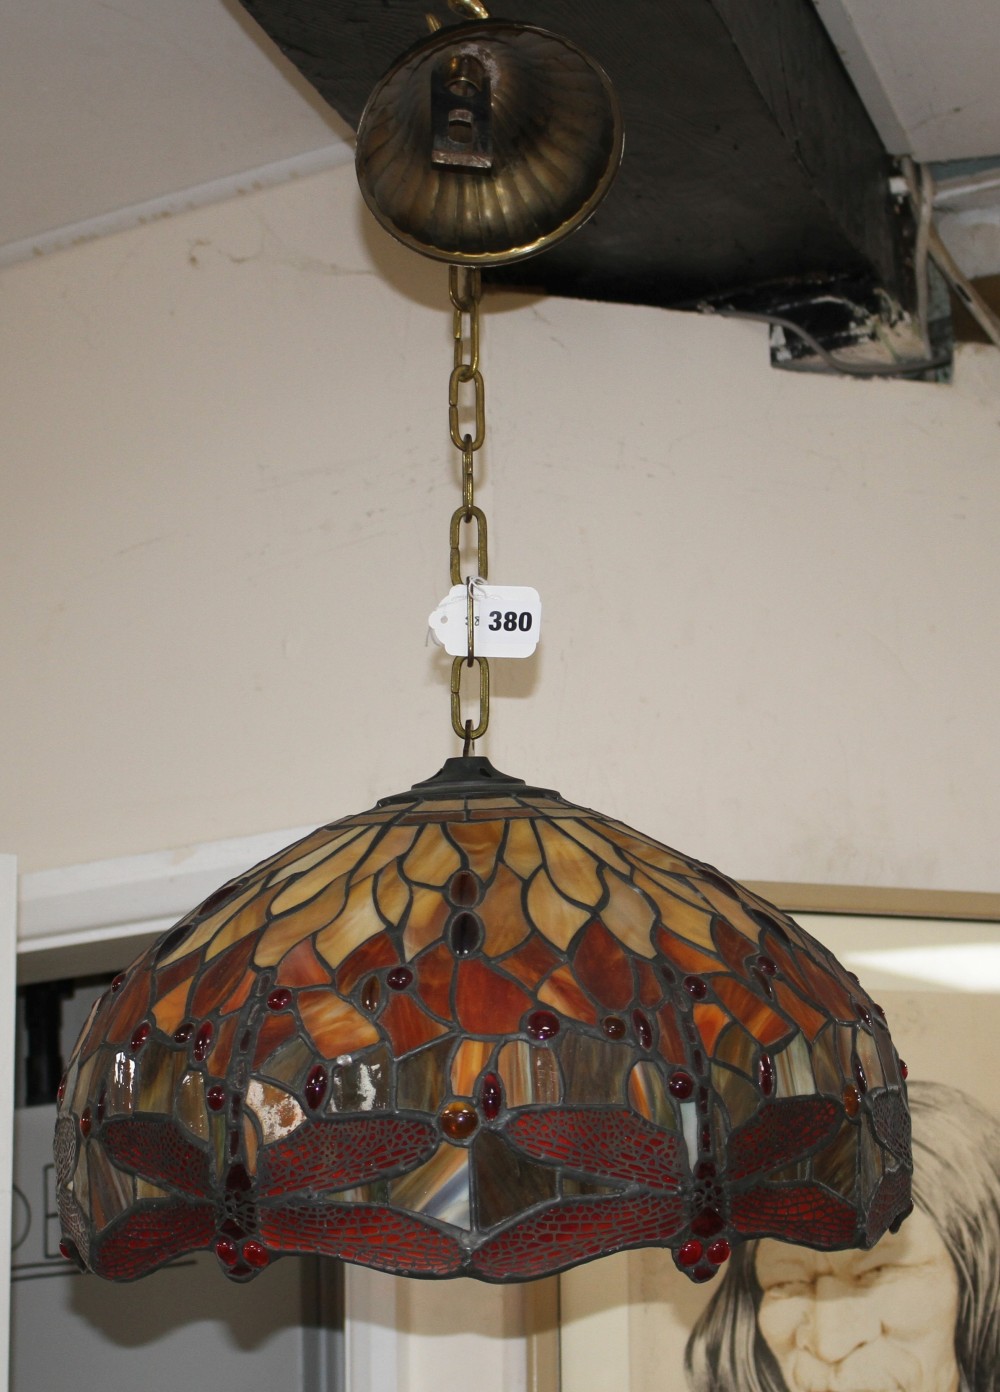 A Tiffany style leaded glass ceiling light, decorated with dragonflies, diameter 41cm, height of bowl 23cm, overall drop approx. 80cm